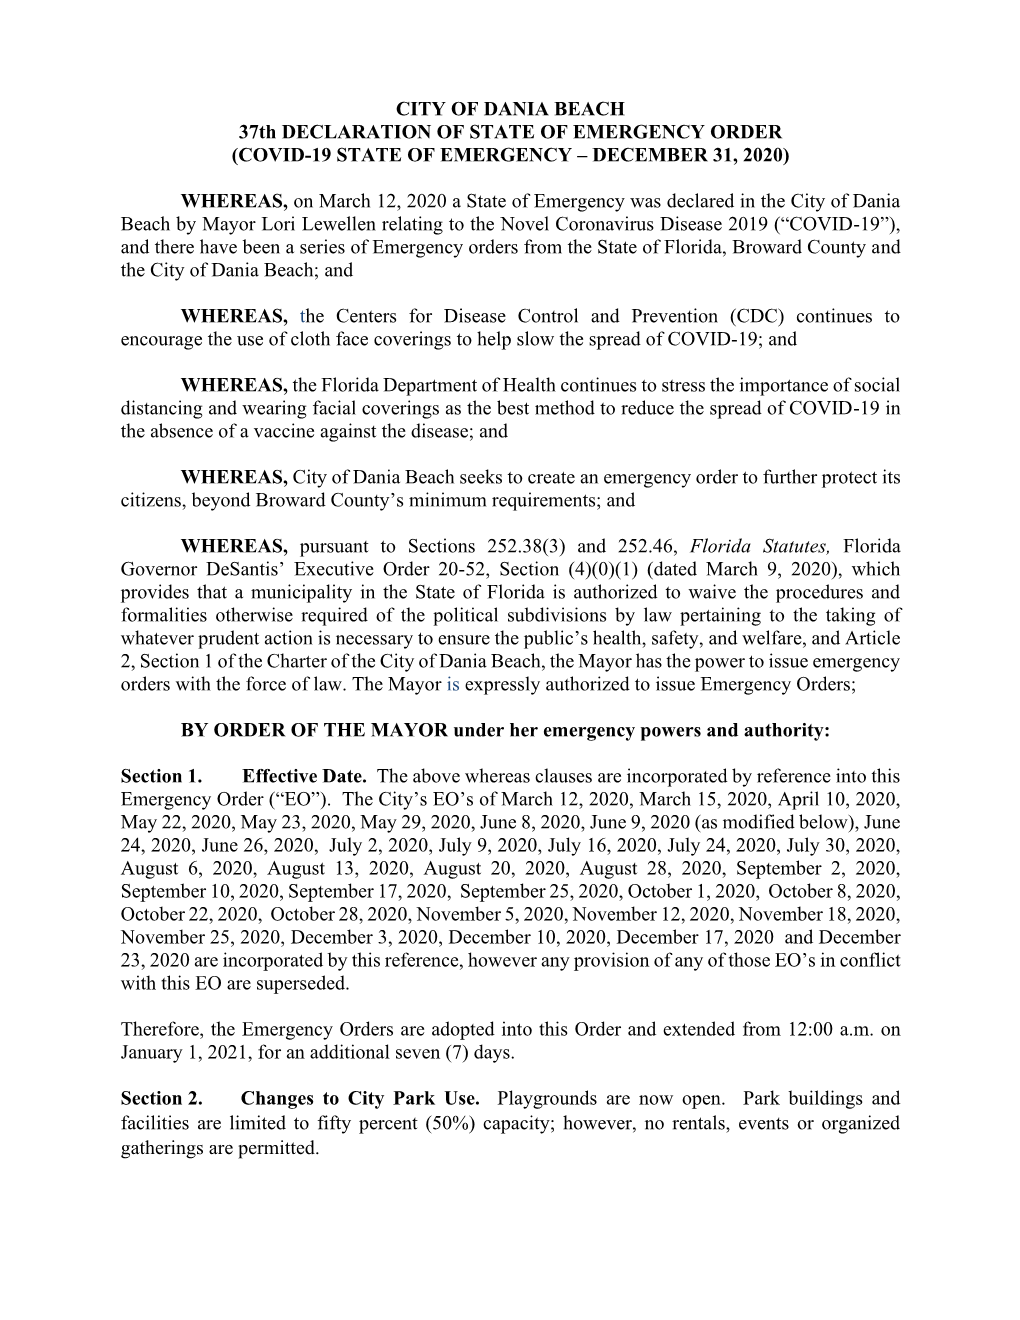 CITY of DANIA BEACH 37Th DECLARATION of STATE of EMERGENCY ORDER (COVID-19 STATE of EMERGENCY – DECEMBER 31, 2020) WHEREAS, On